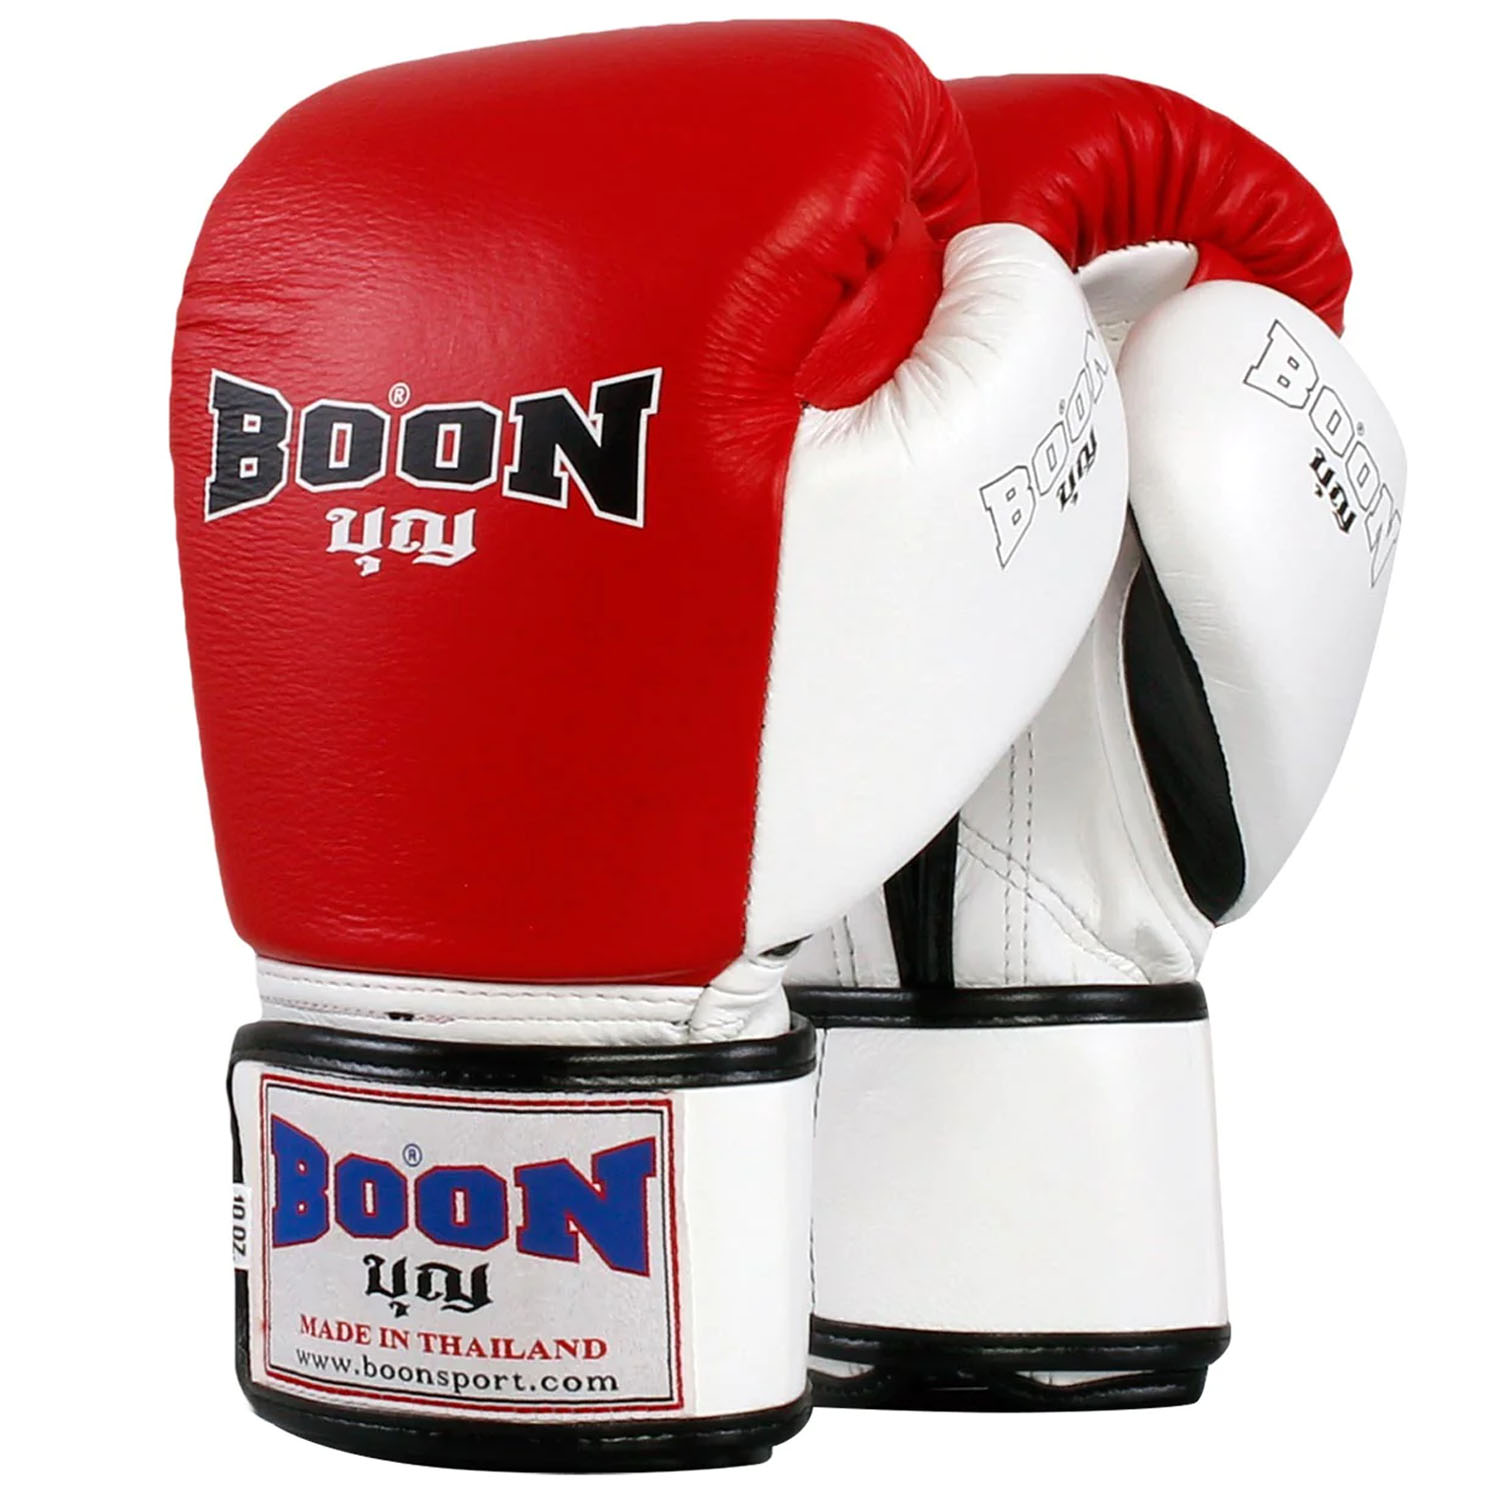 BOON Boxing Gloves, BGCBK, Compact Velcro, red-white, 14 Oz